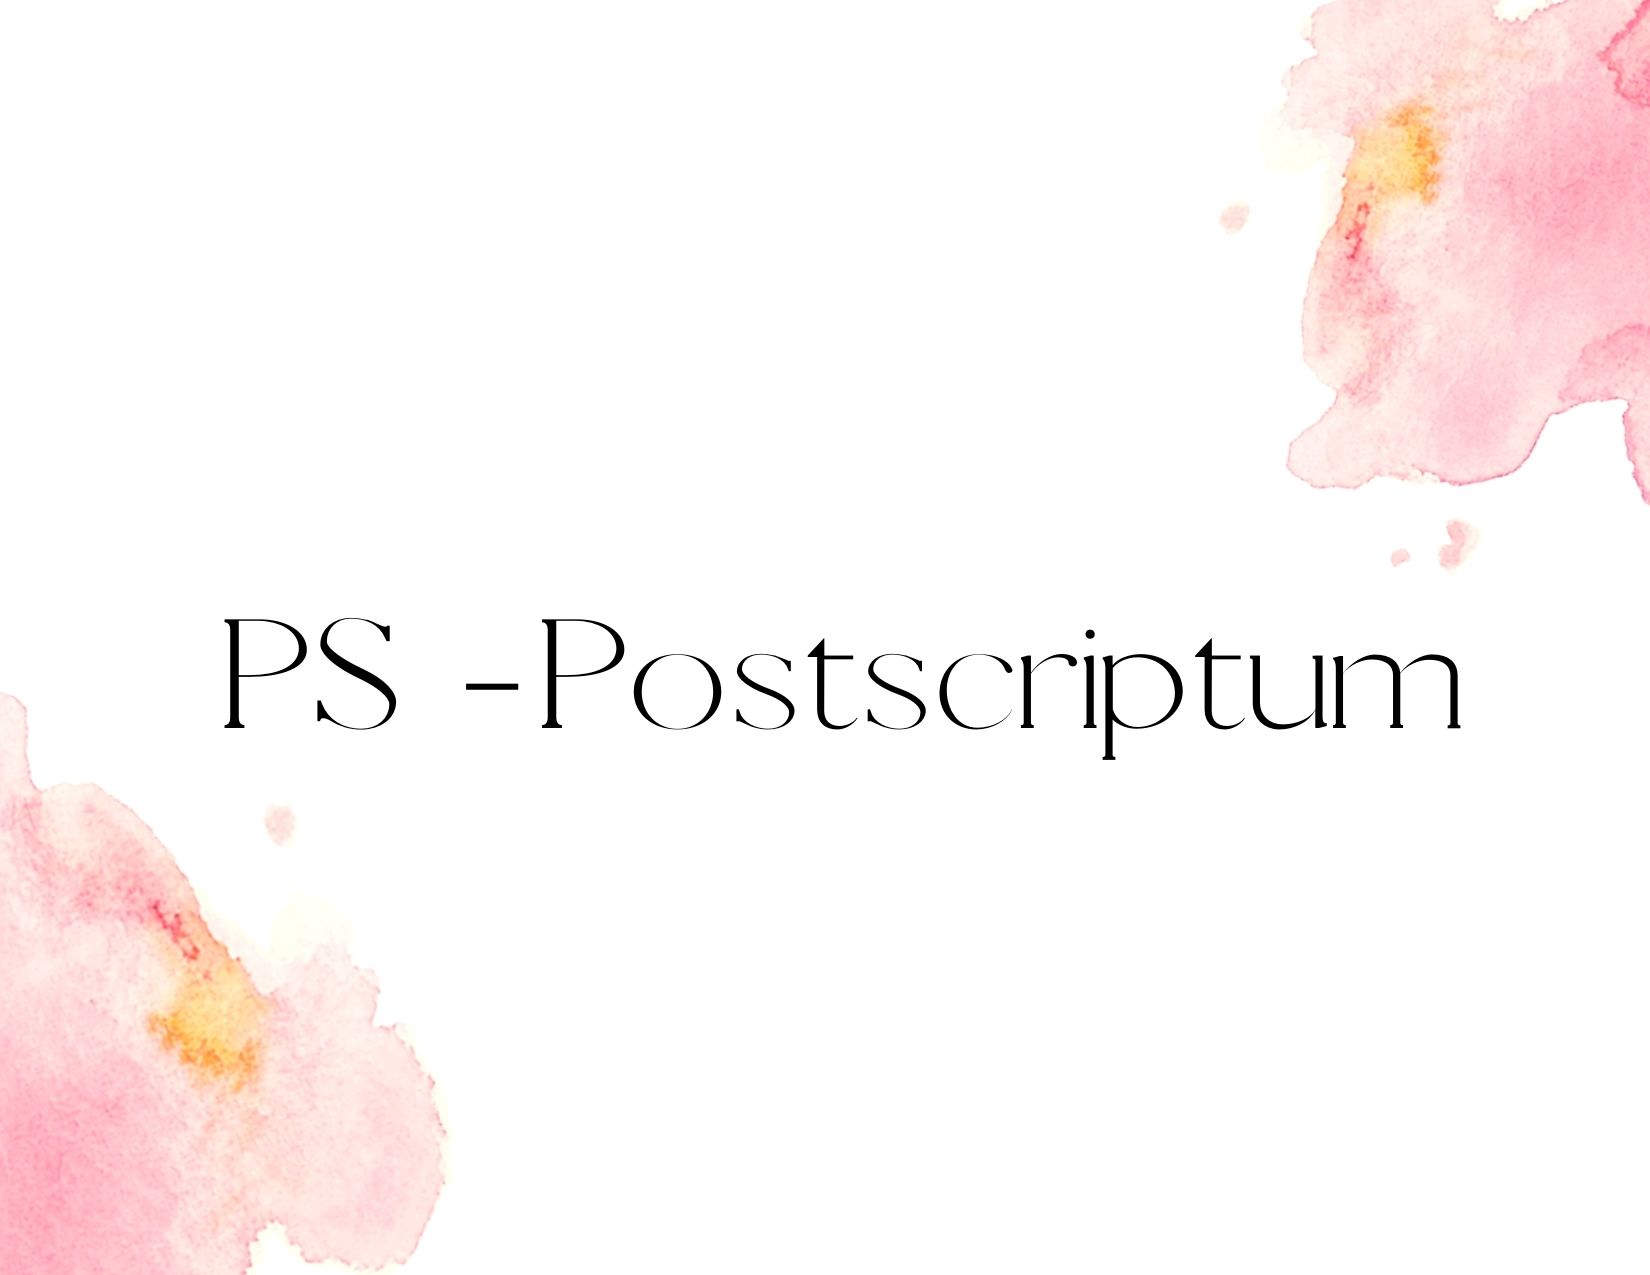 What Does PS Mean? - BusinessWritingBlog